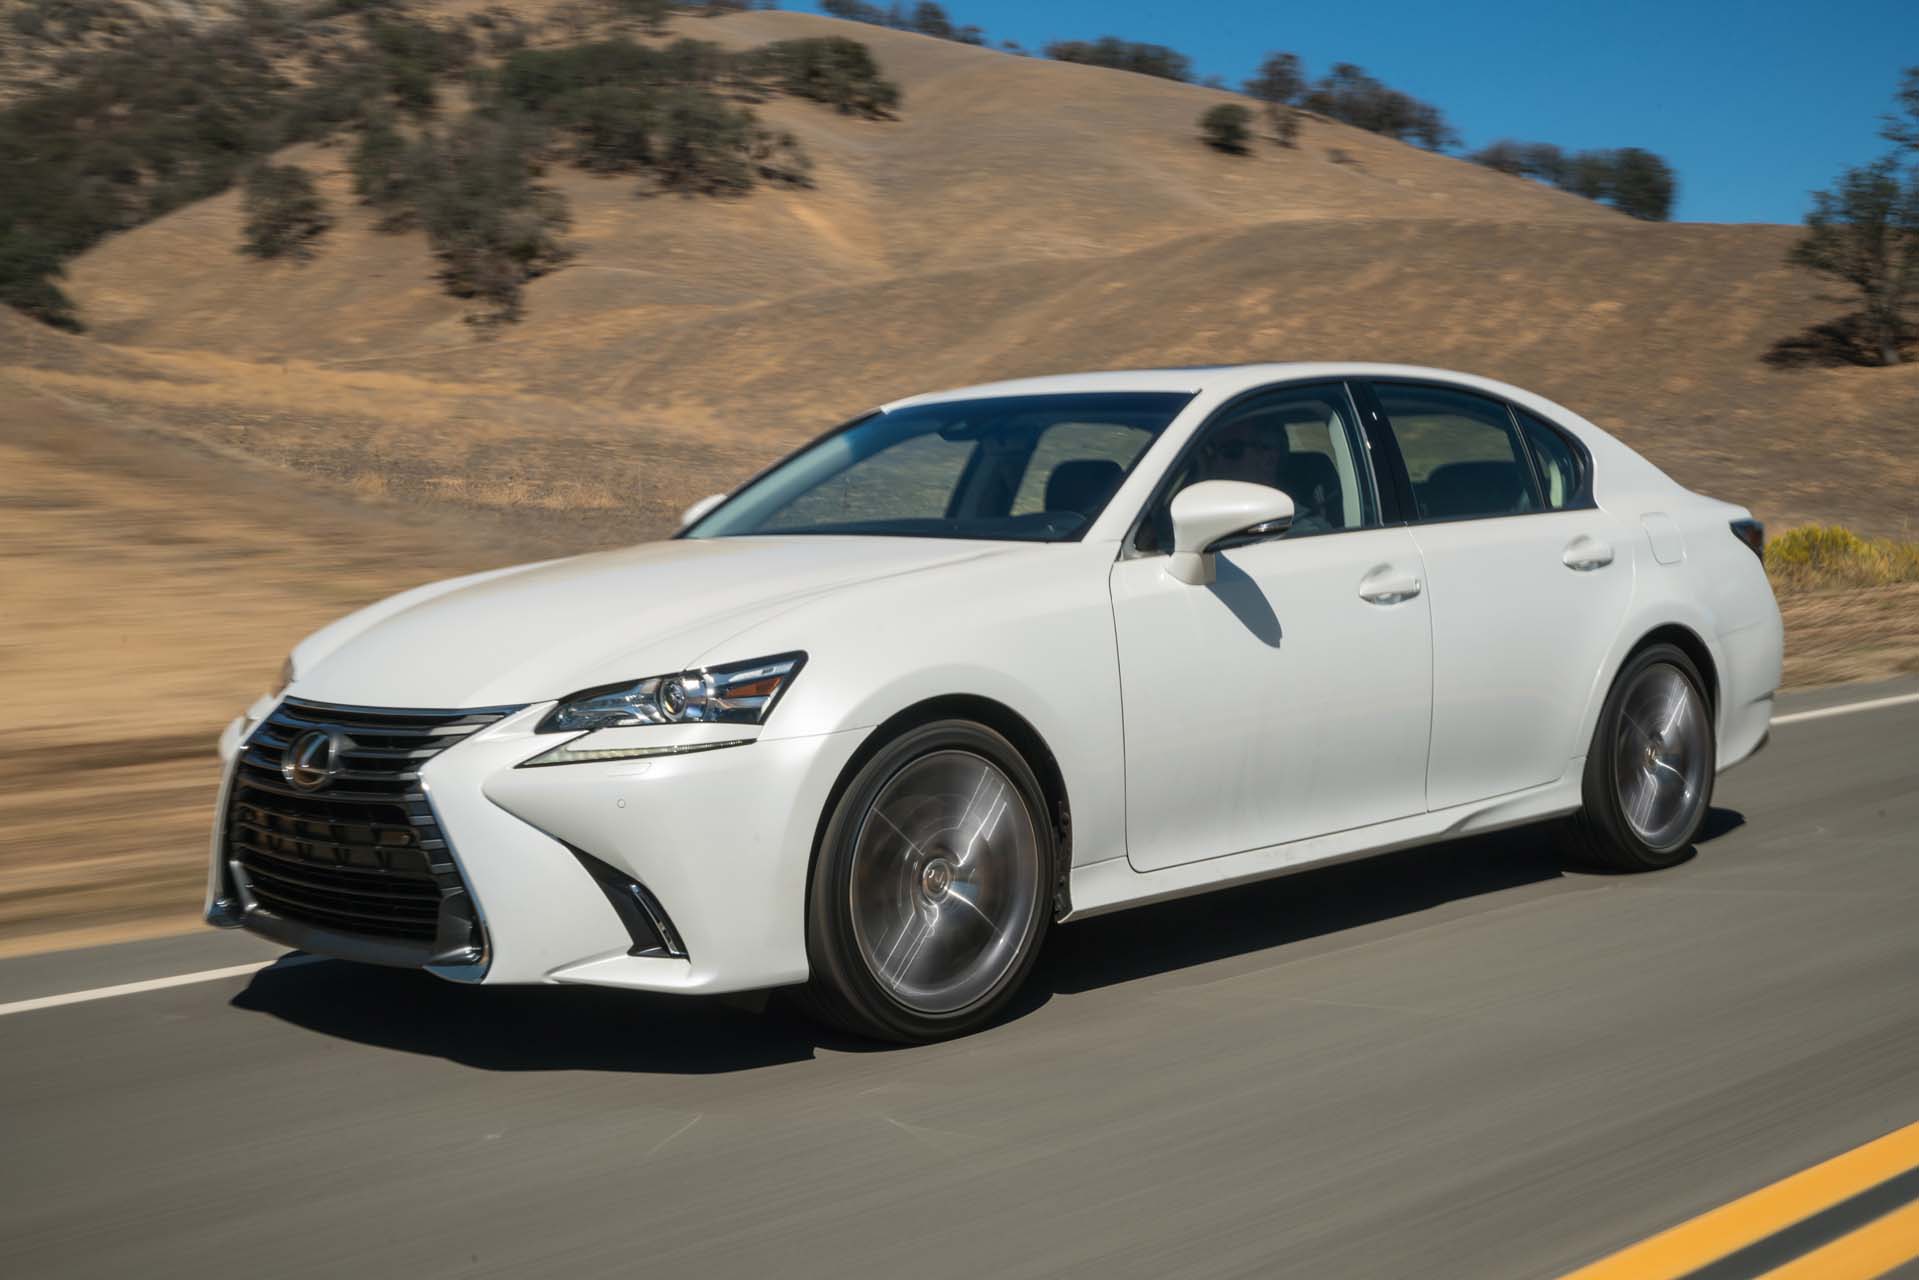 19 Lexus Gs Review Ratings Specs Prices And Photos The Car Connection